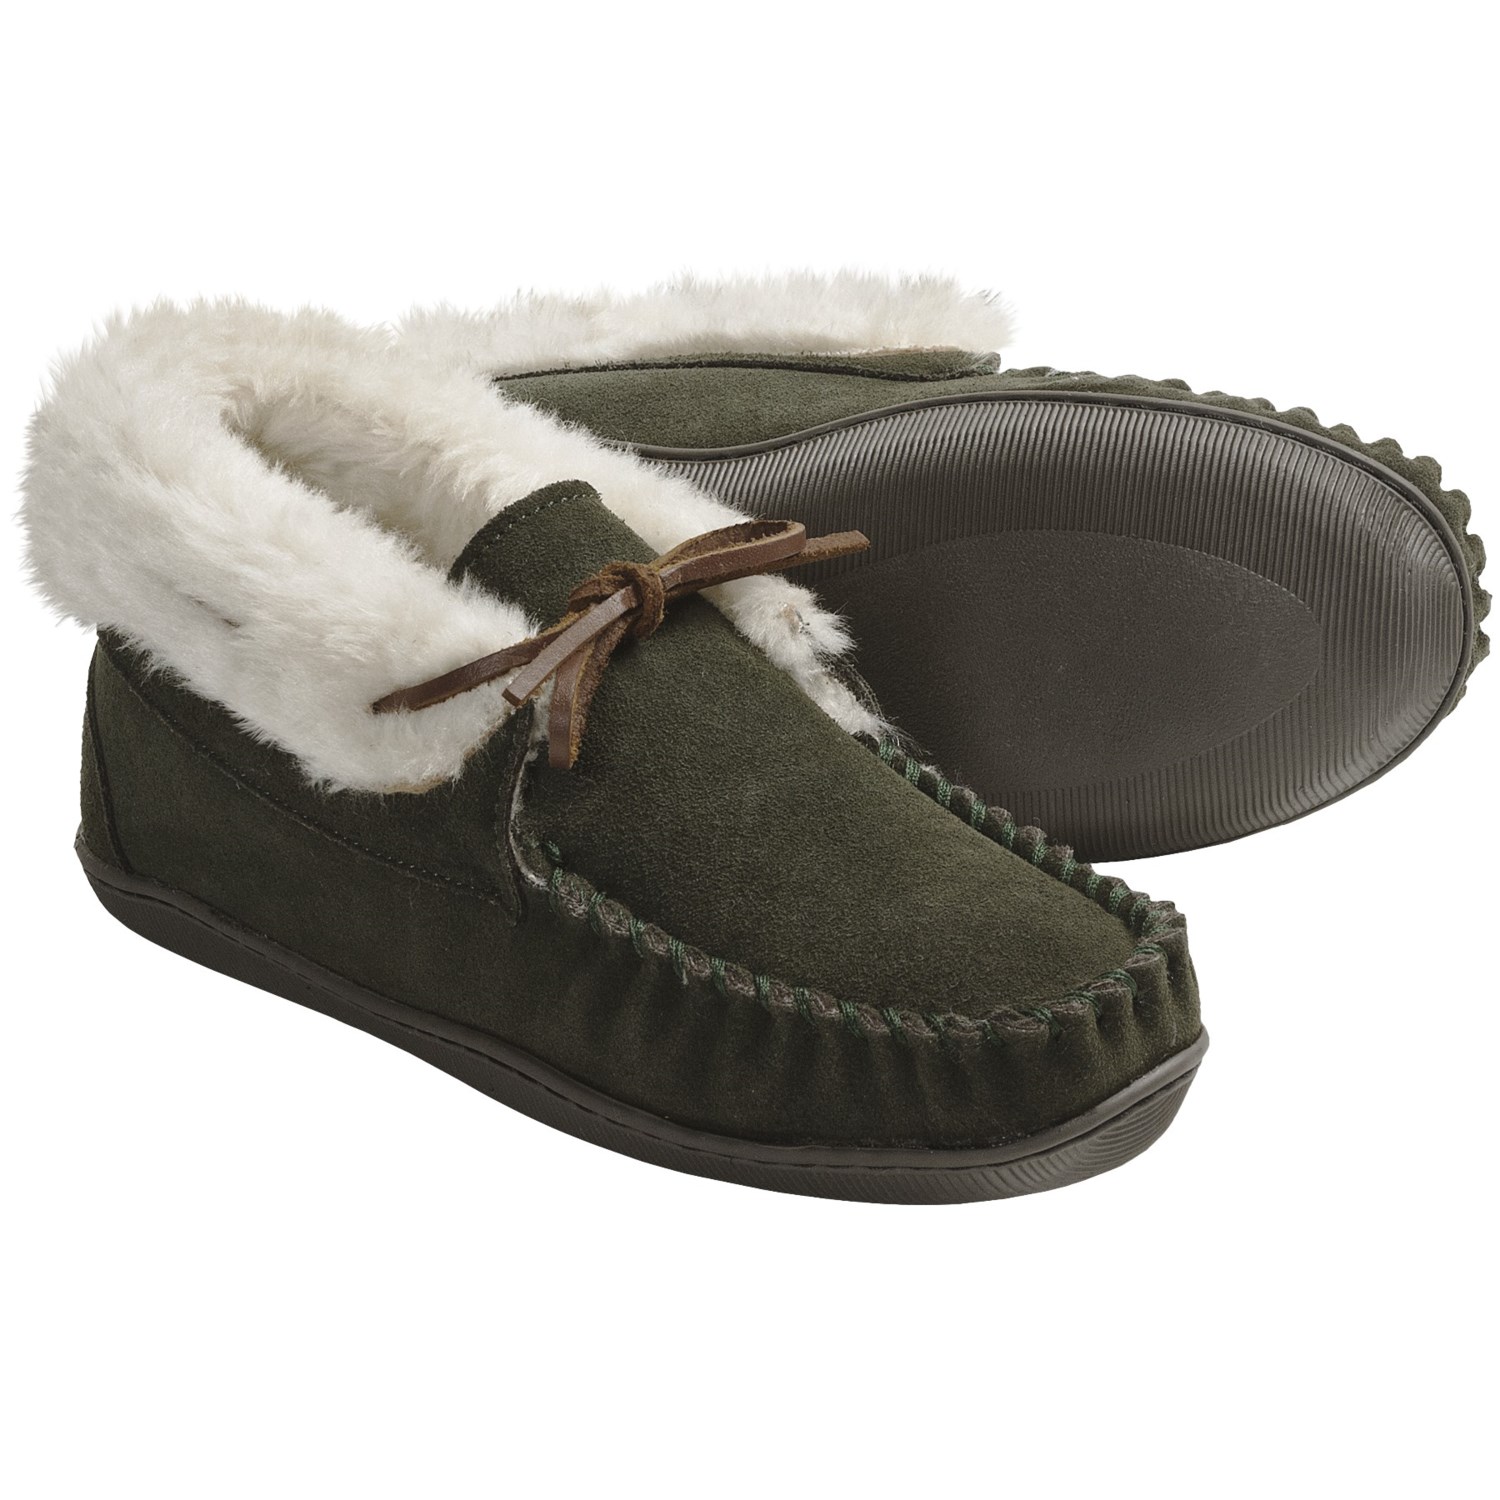 mens leather moccasin slippers uk